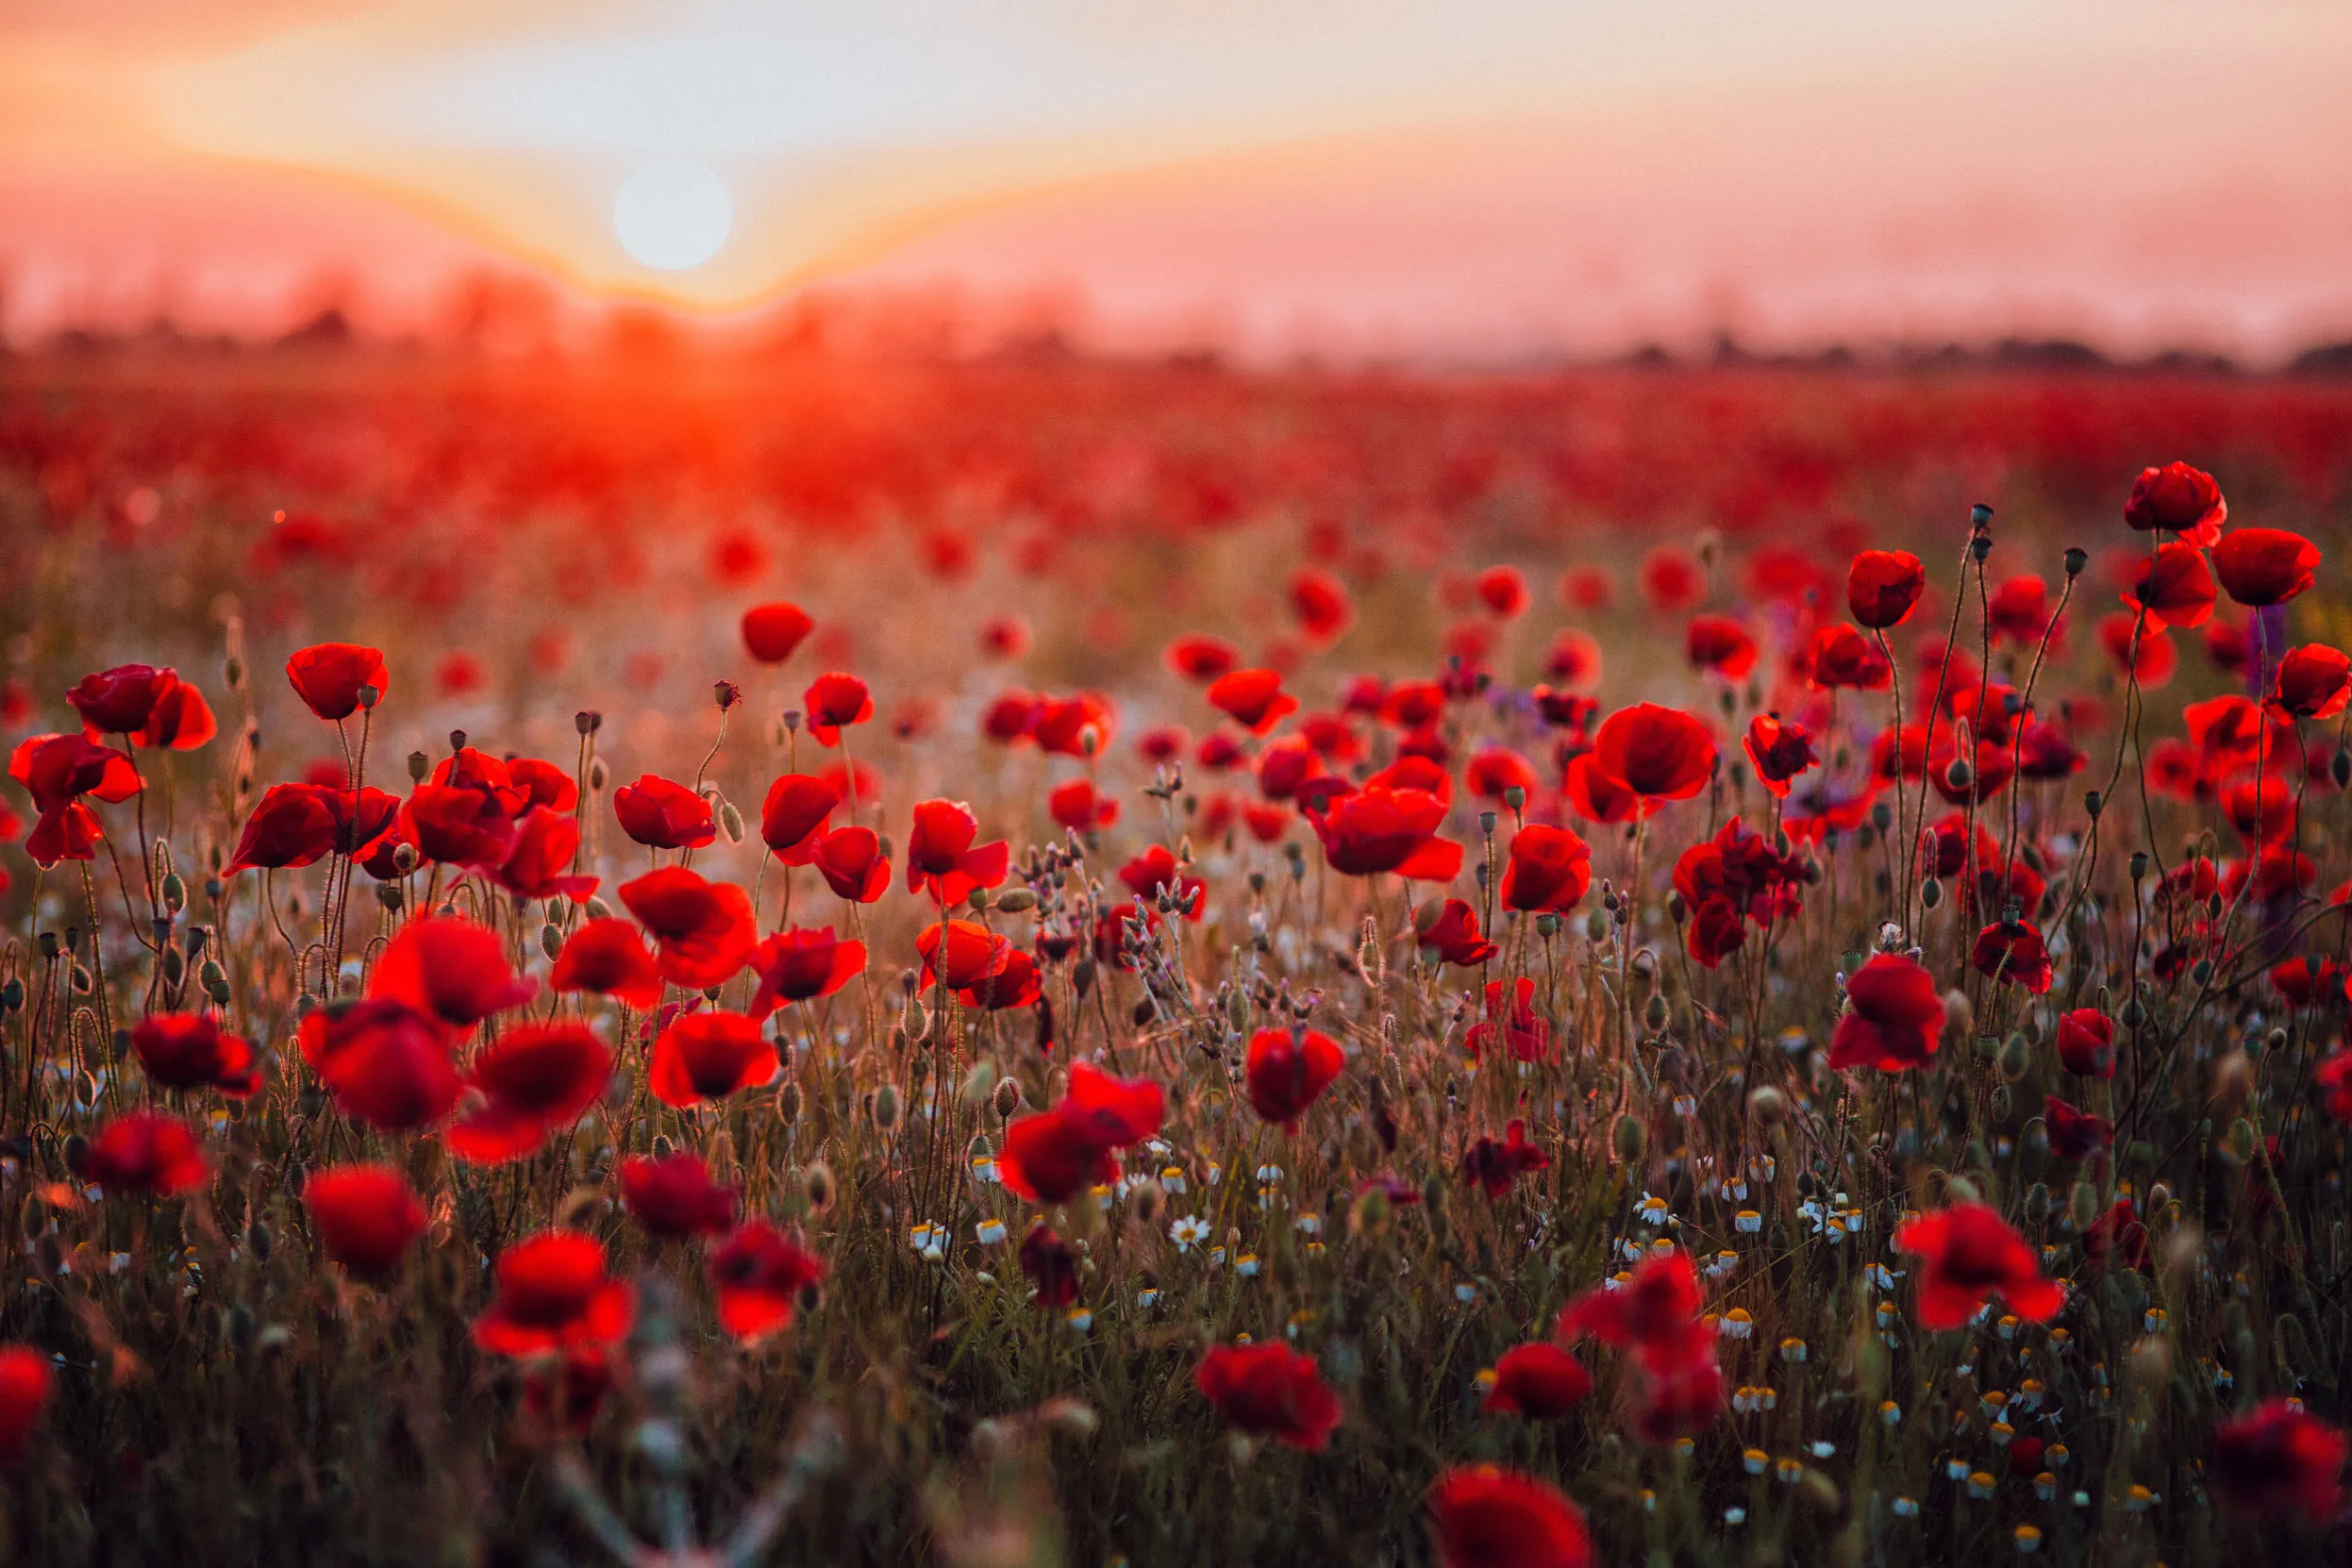 The sun rising over a field of bright red poppies which extends to the horizon.